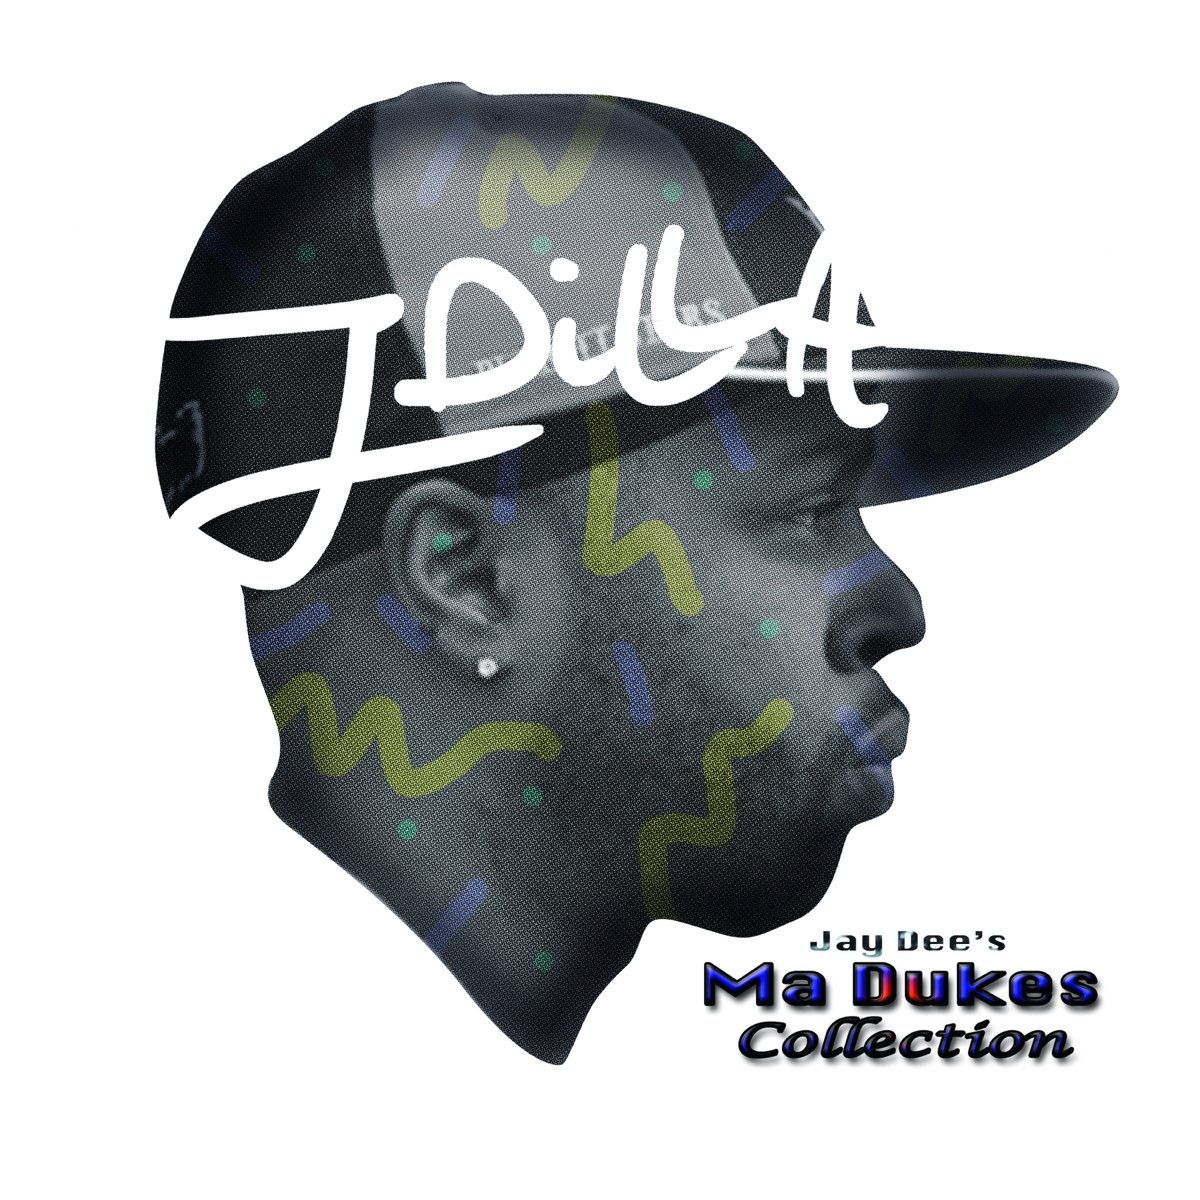 Jay Dee's Ma Dukes Collection - Album by J Dilla - Apple Music